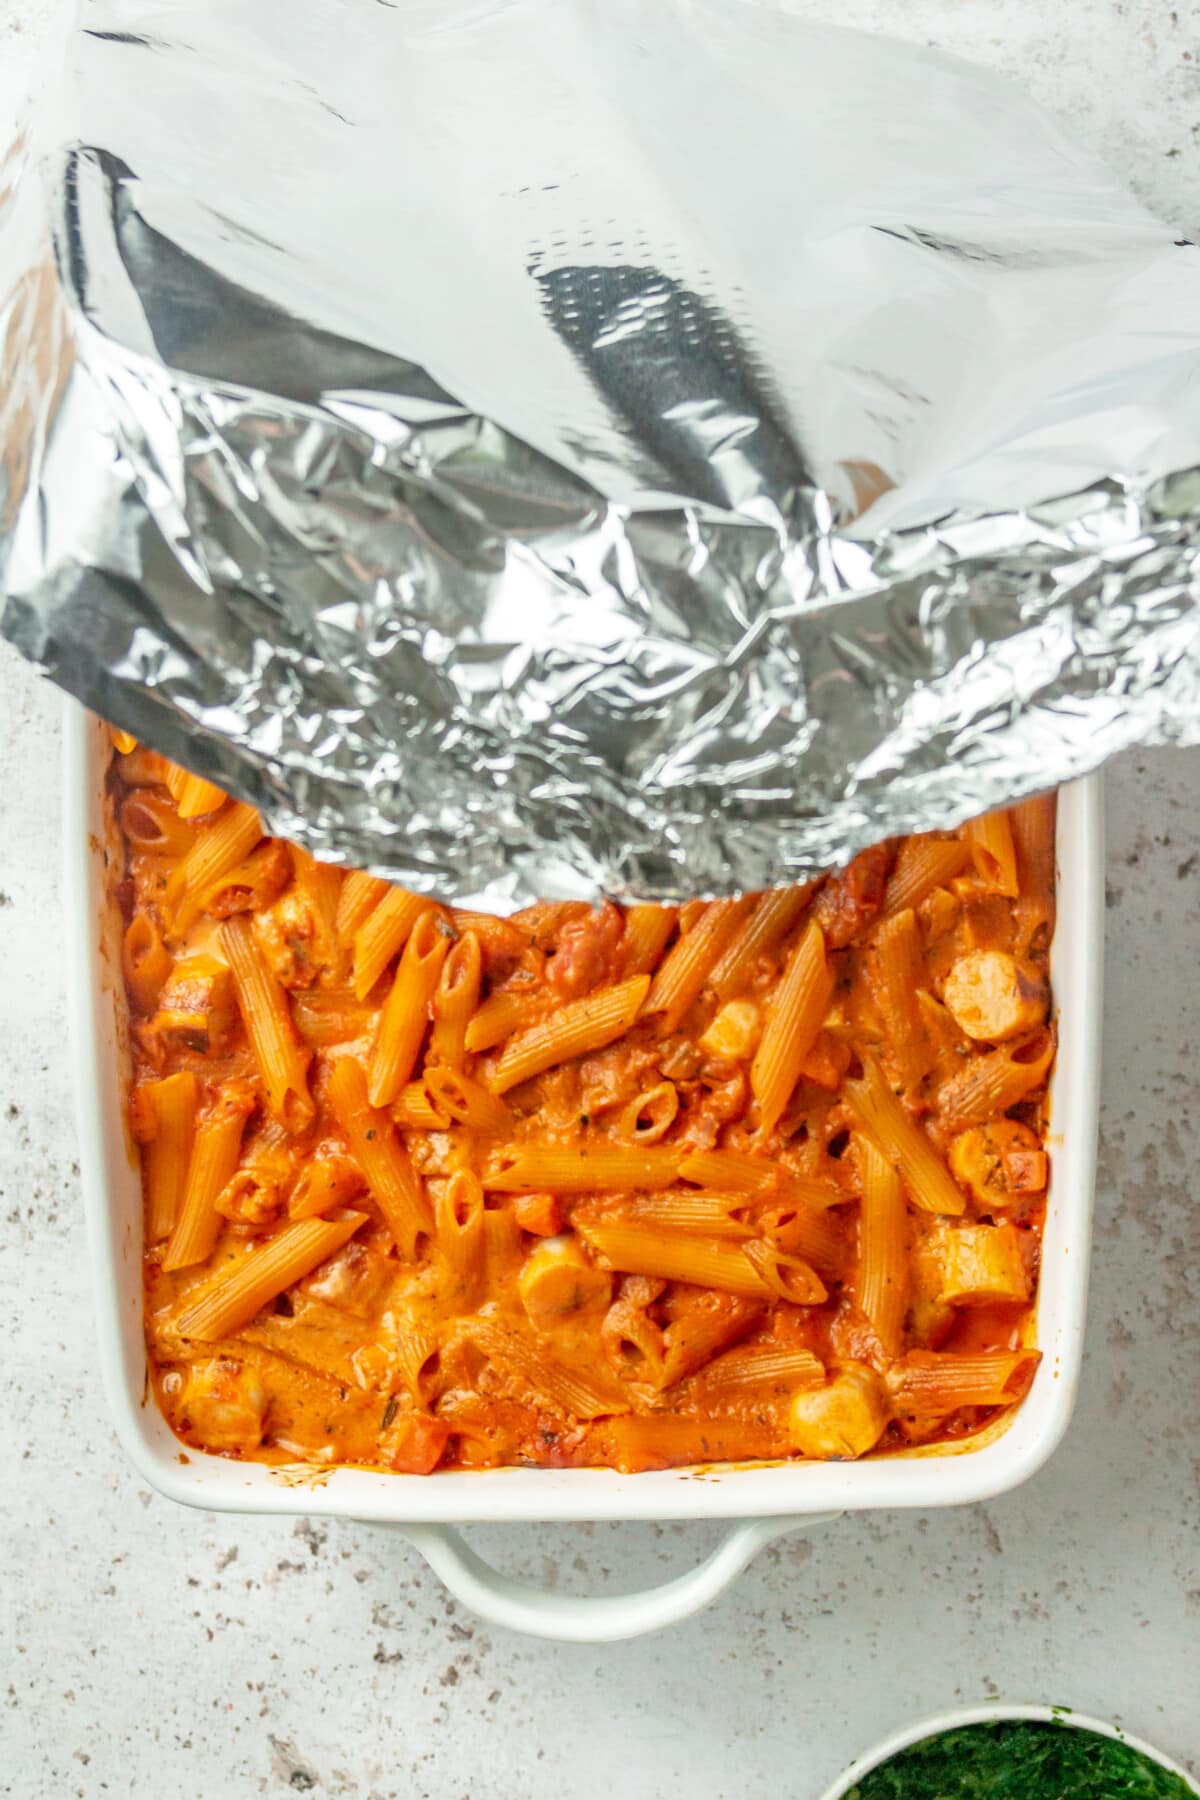 Aluminium foil is pulled off no boil pasta bake in a baking dish on a light grey colored surface.